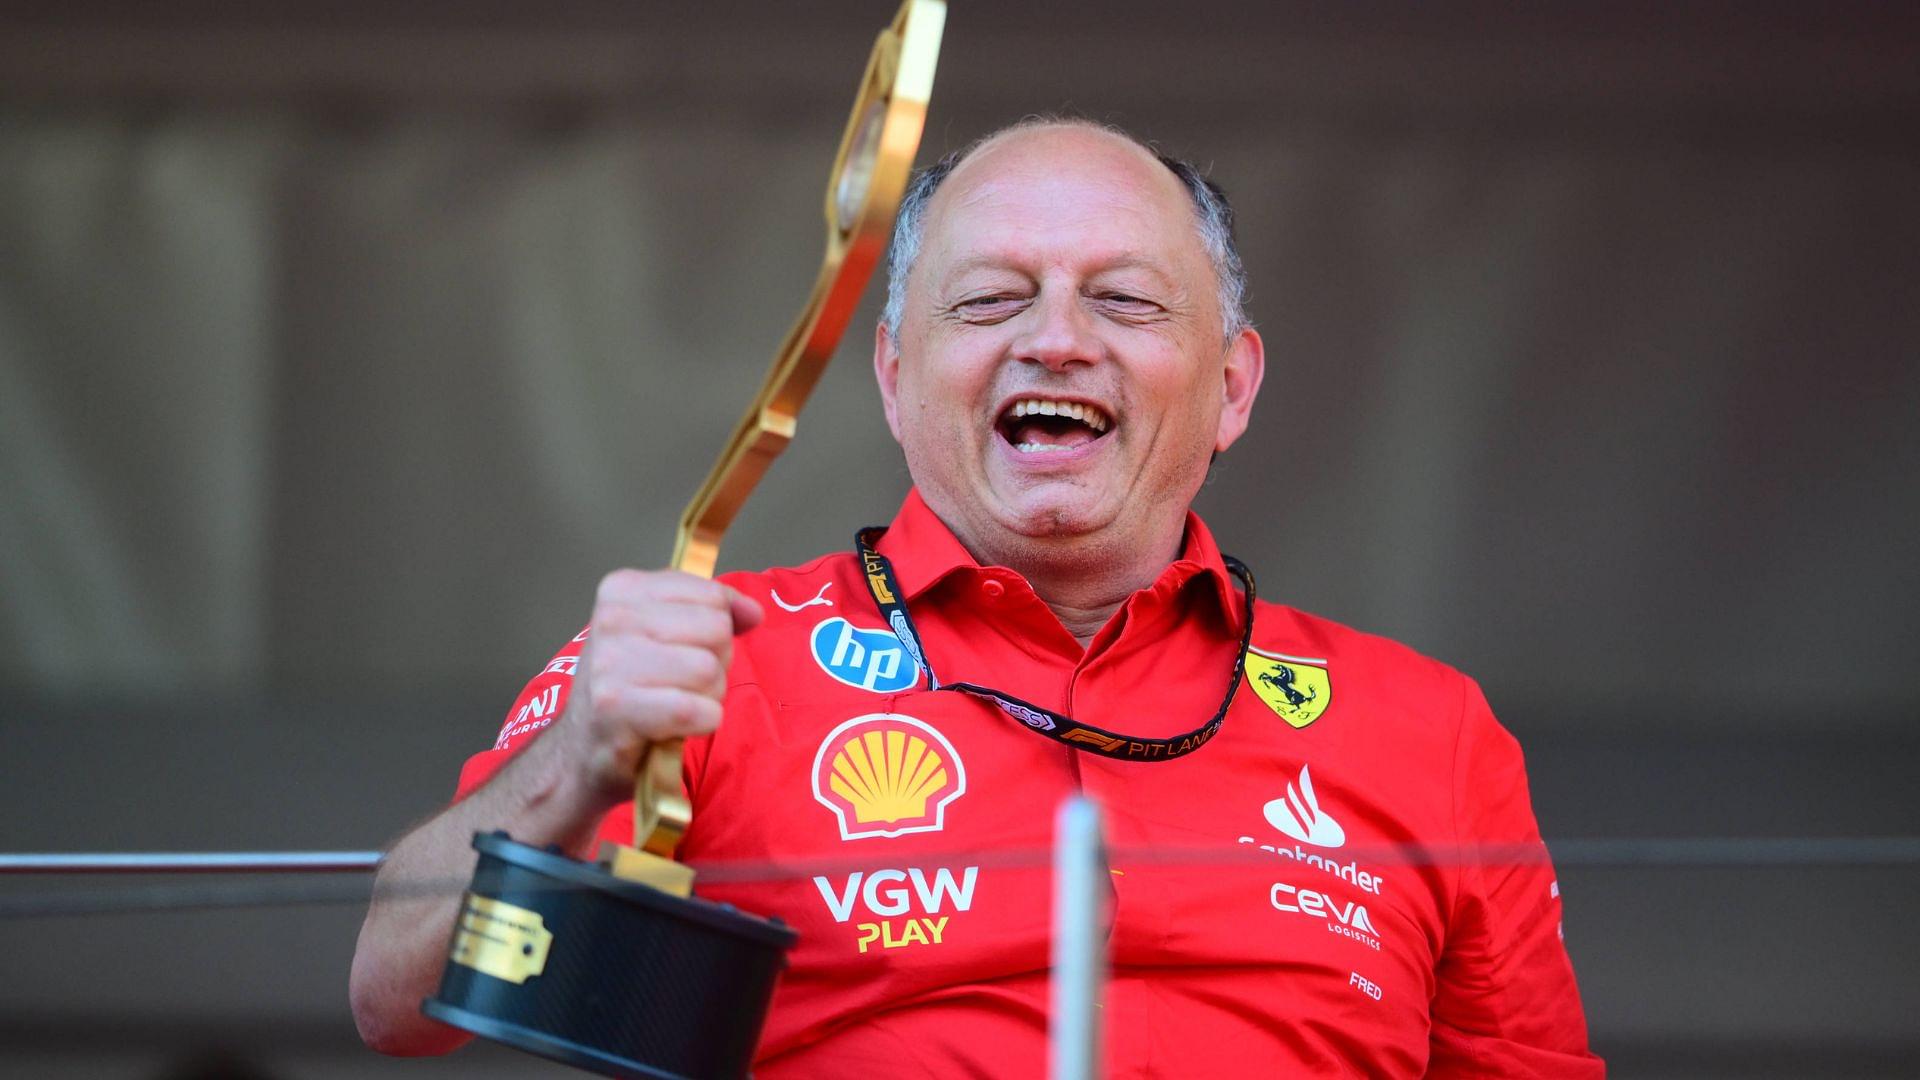 2 Wins in the Bag, Fred Vasseur Looks at What’s Next for Ferrari in Battle With Red Bull